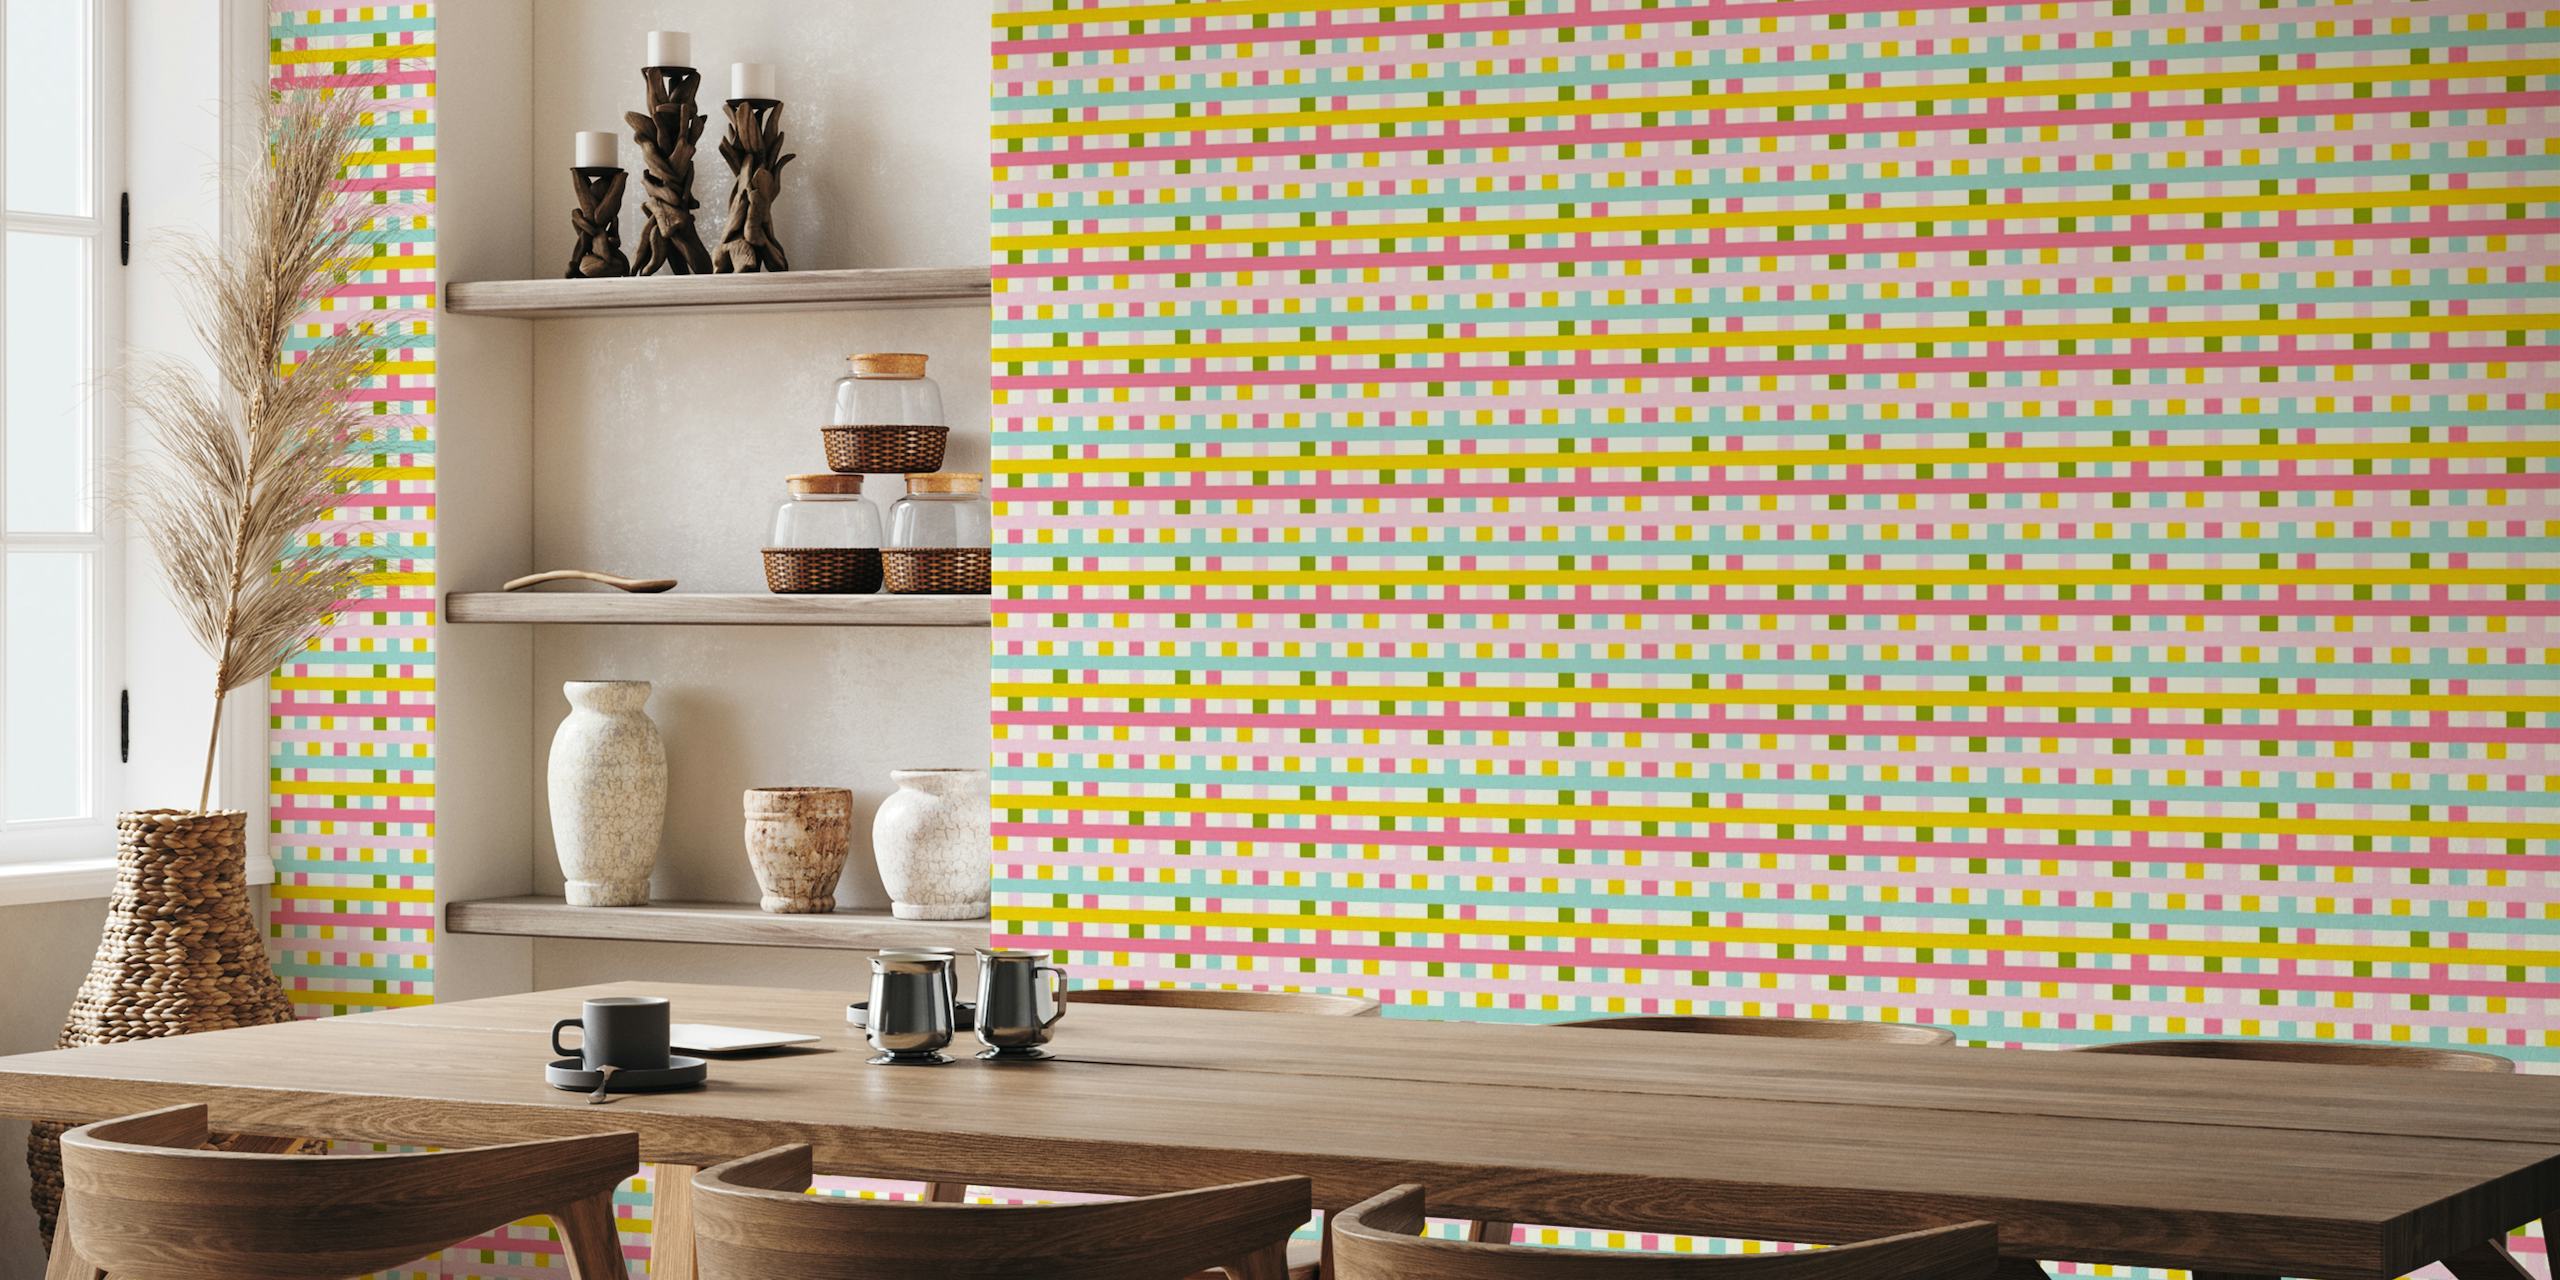 Colorful checkered pattern wall mural with pastel pink, blue, yellow, and green squares